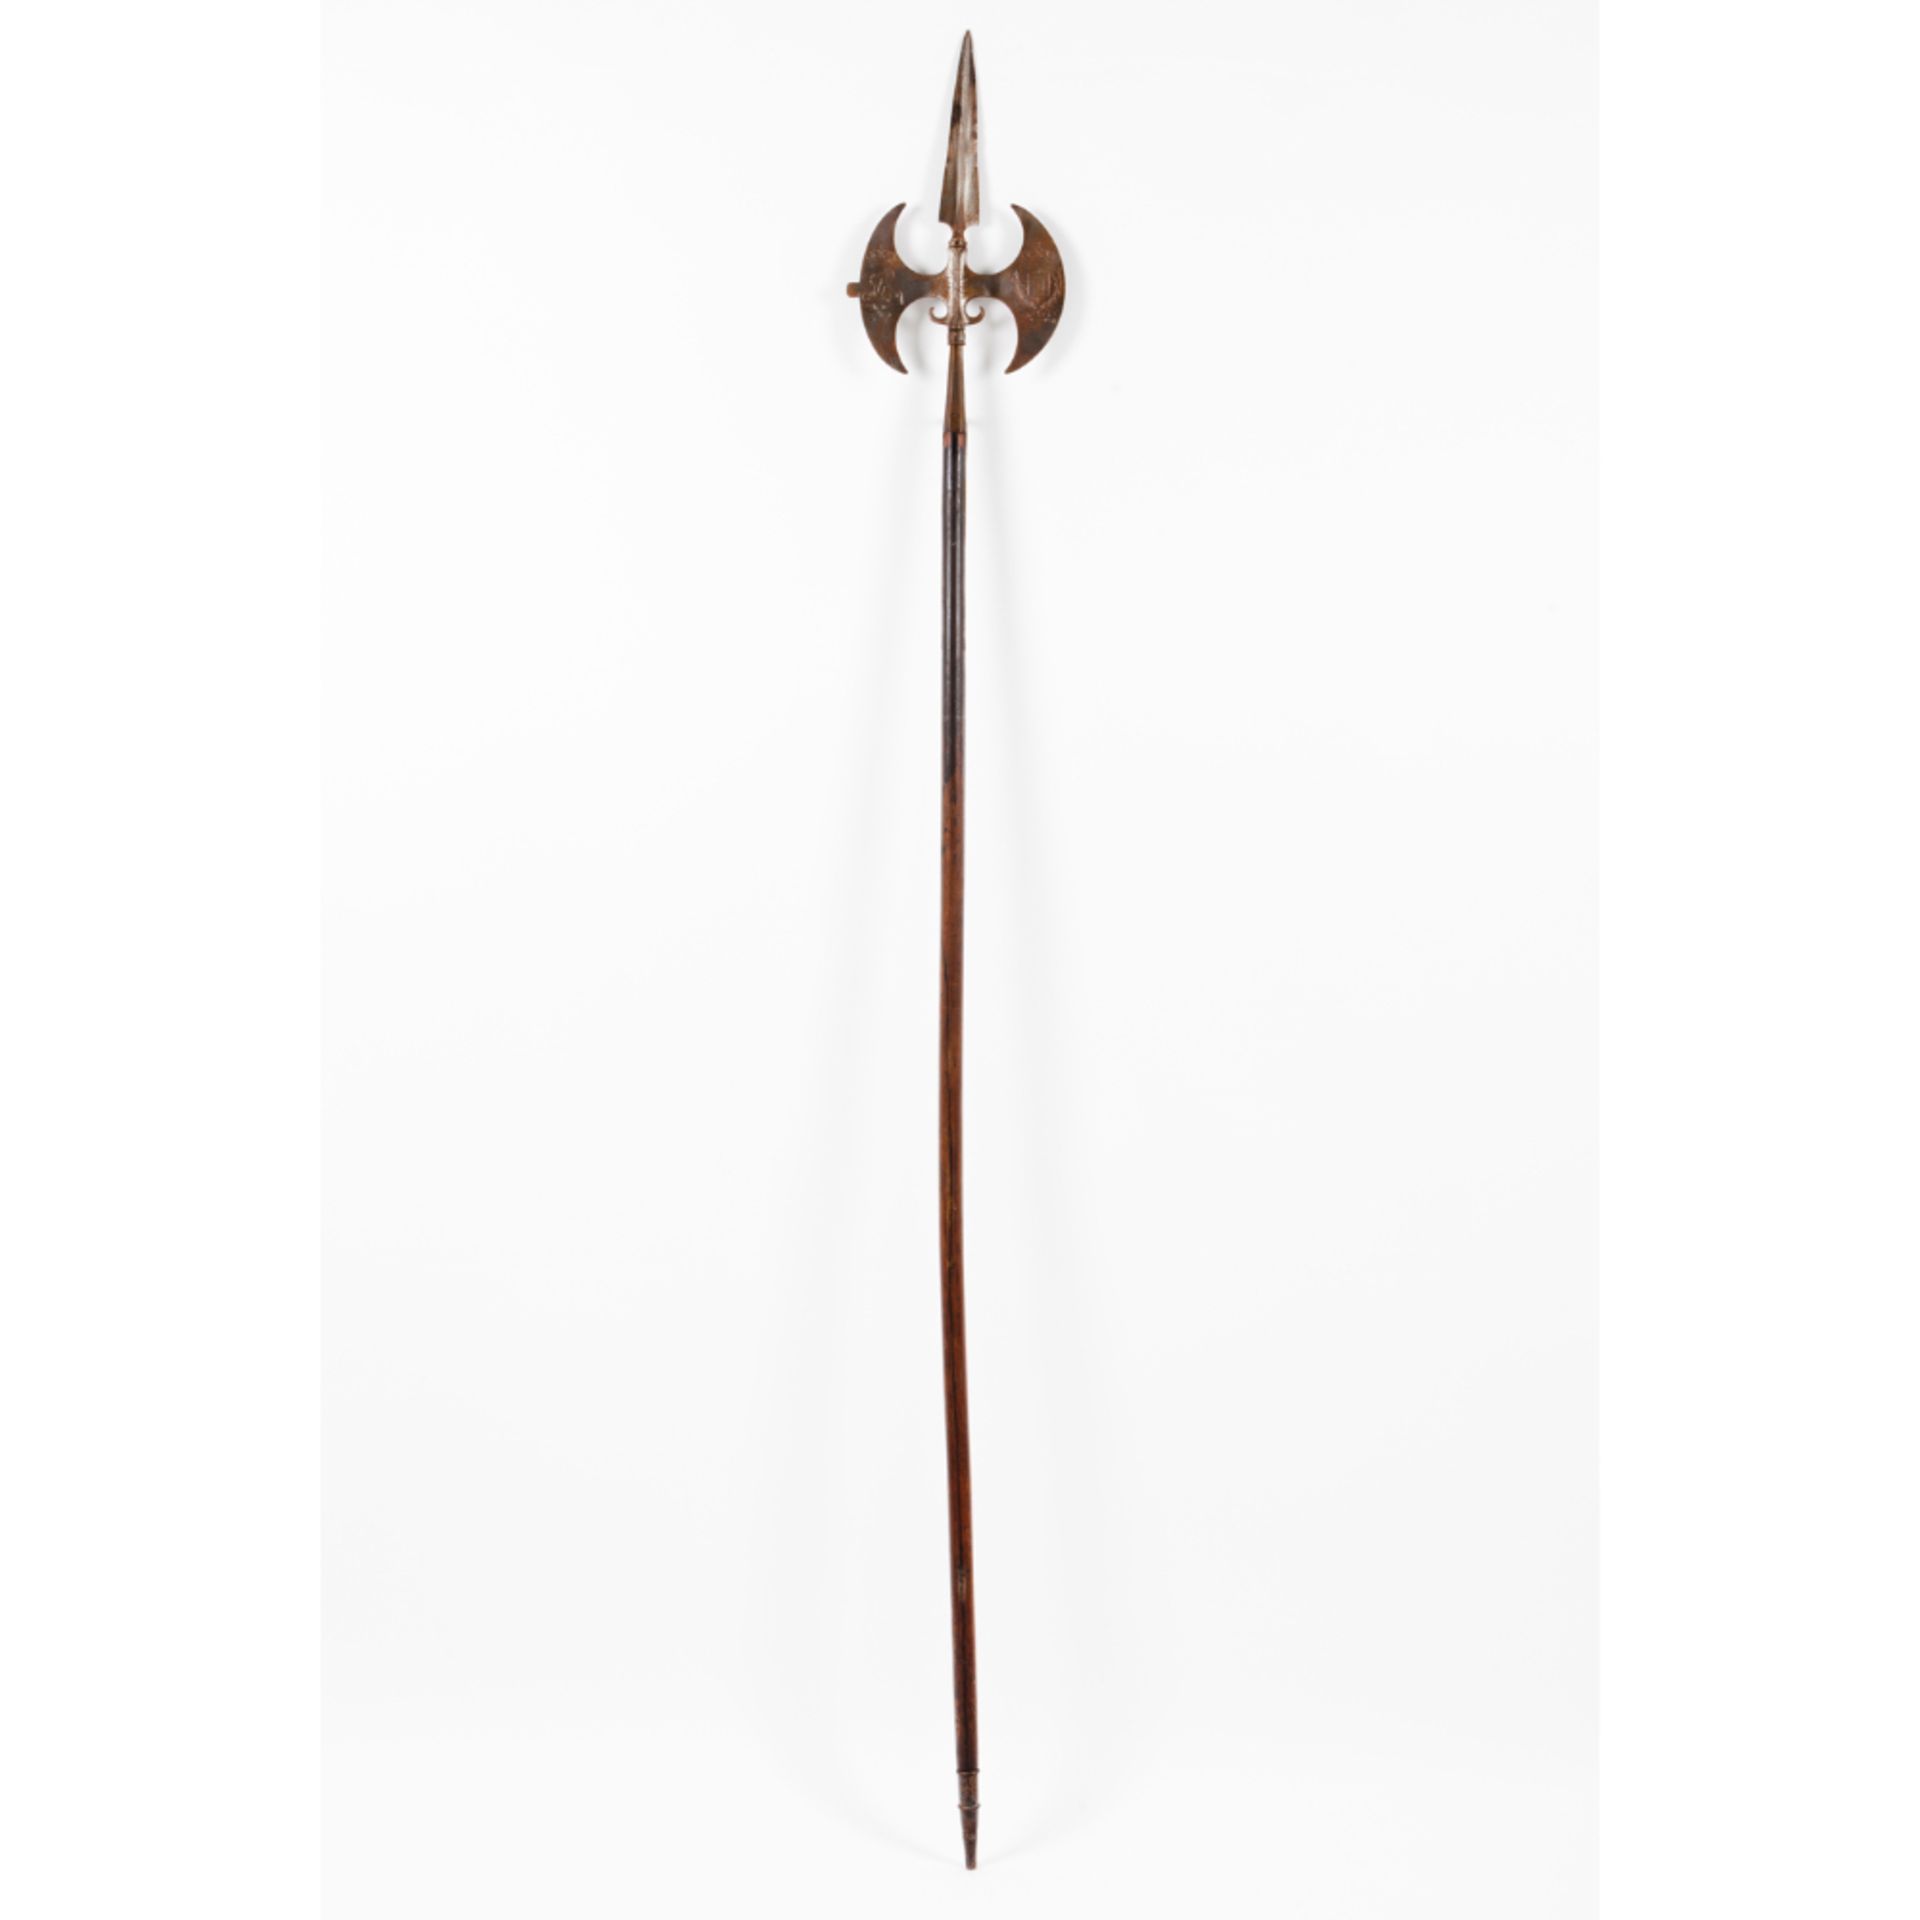 An halberd for Royal House archerBrazilian mahogany and wrought iron Engraved decoration to both